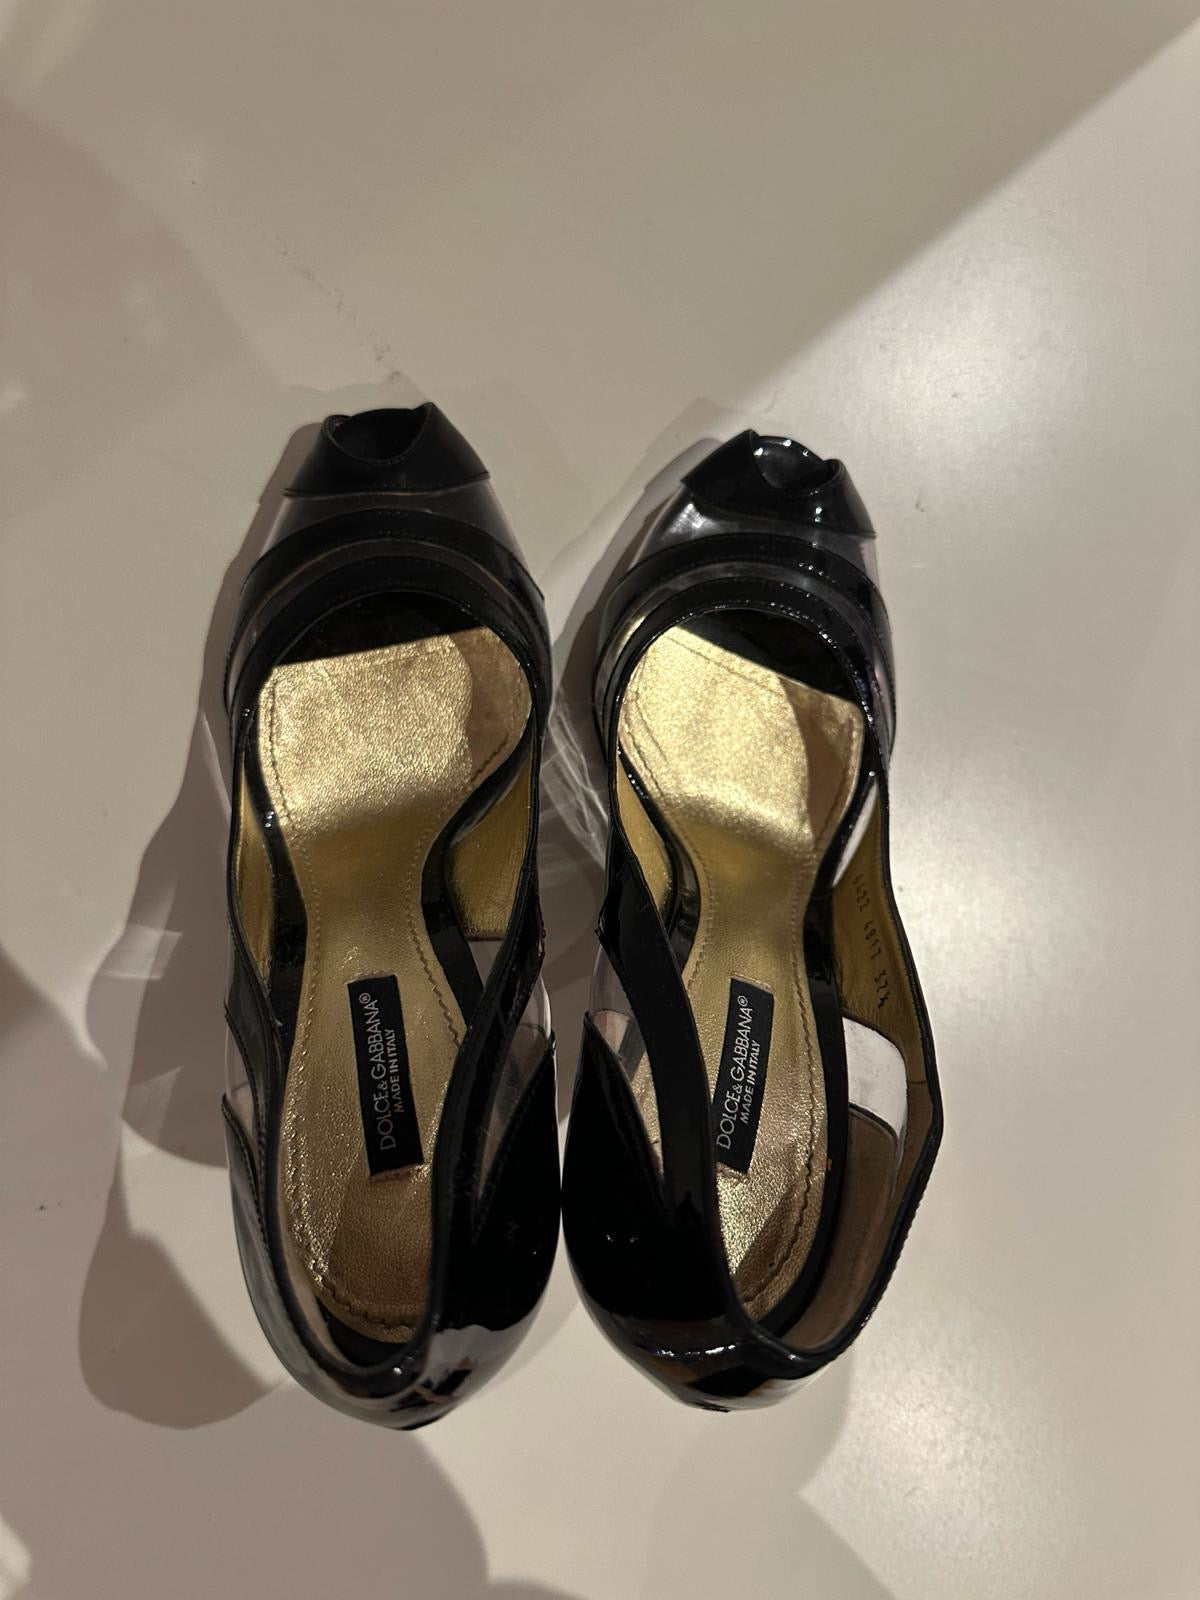 DOLCE and GABBANA patent leather heels